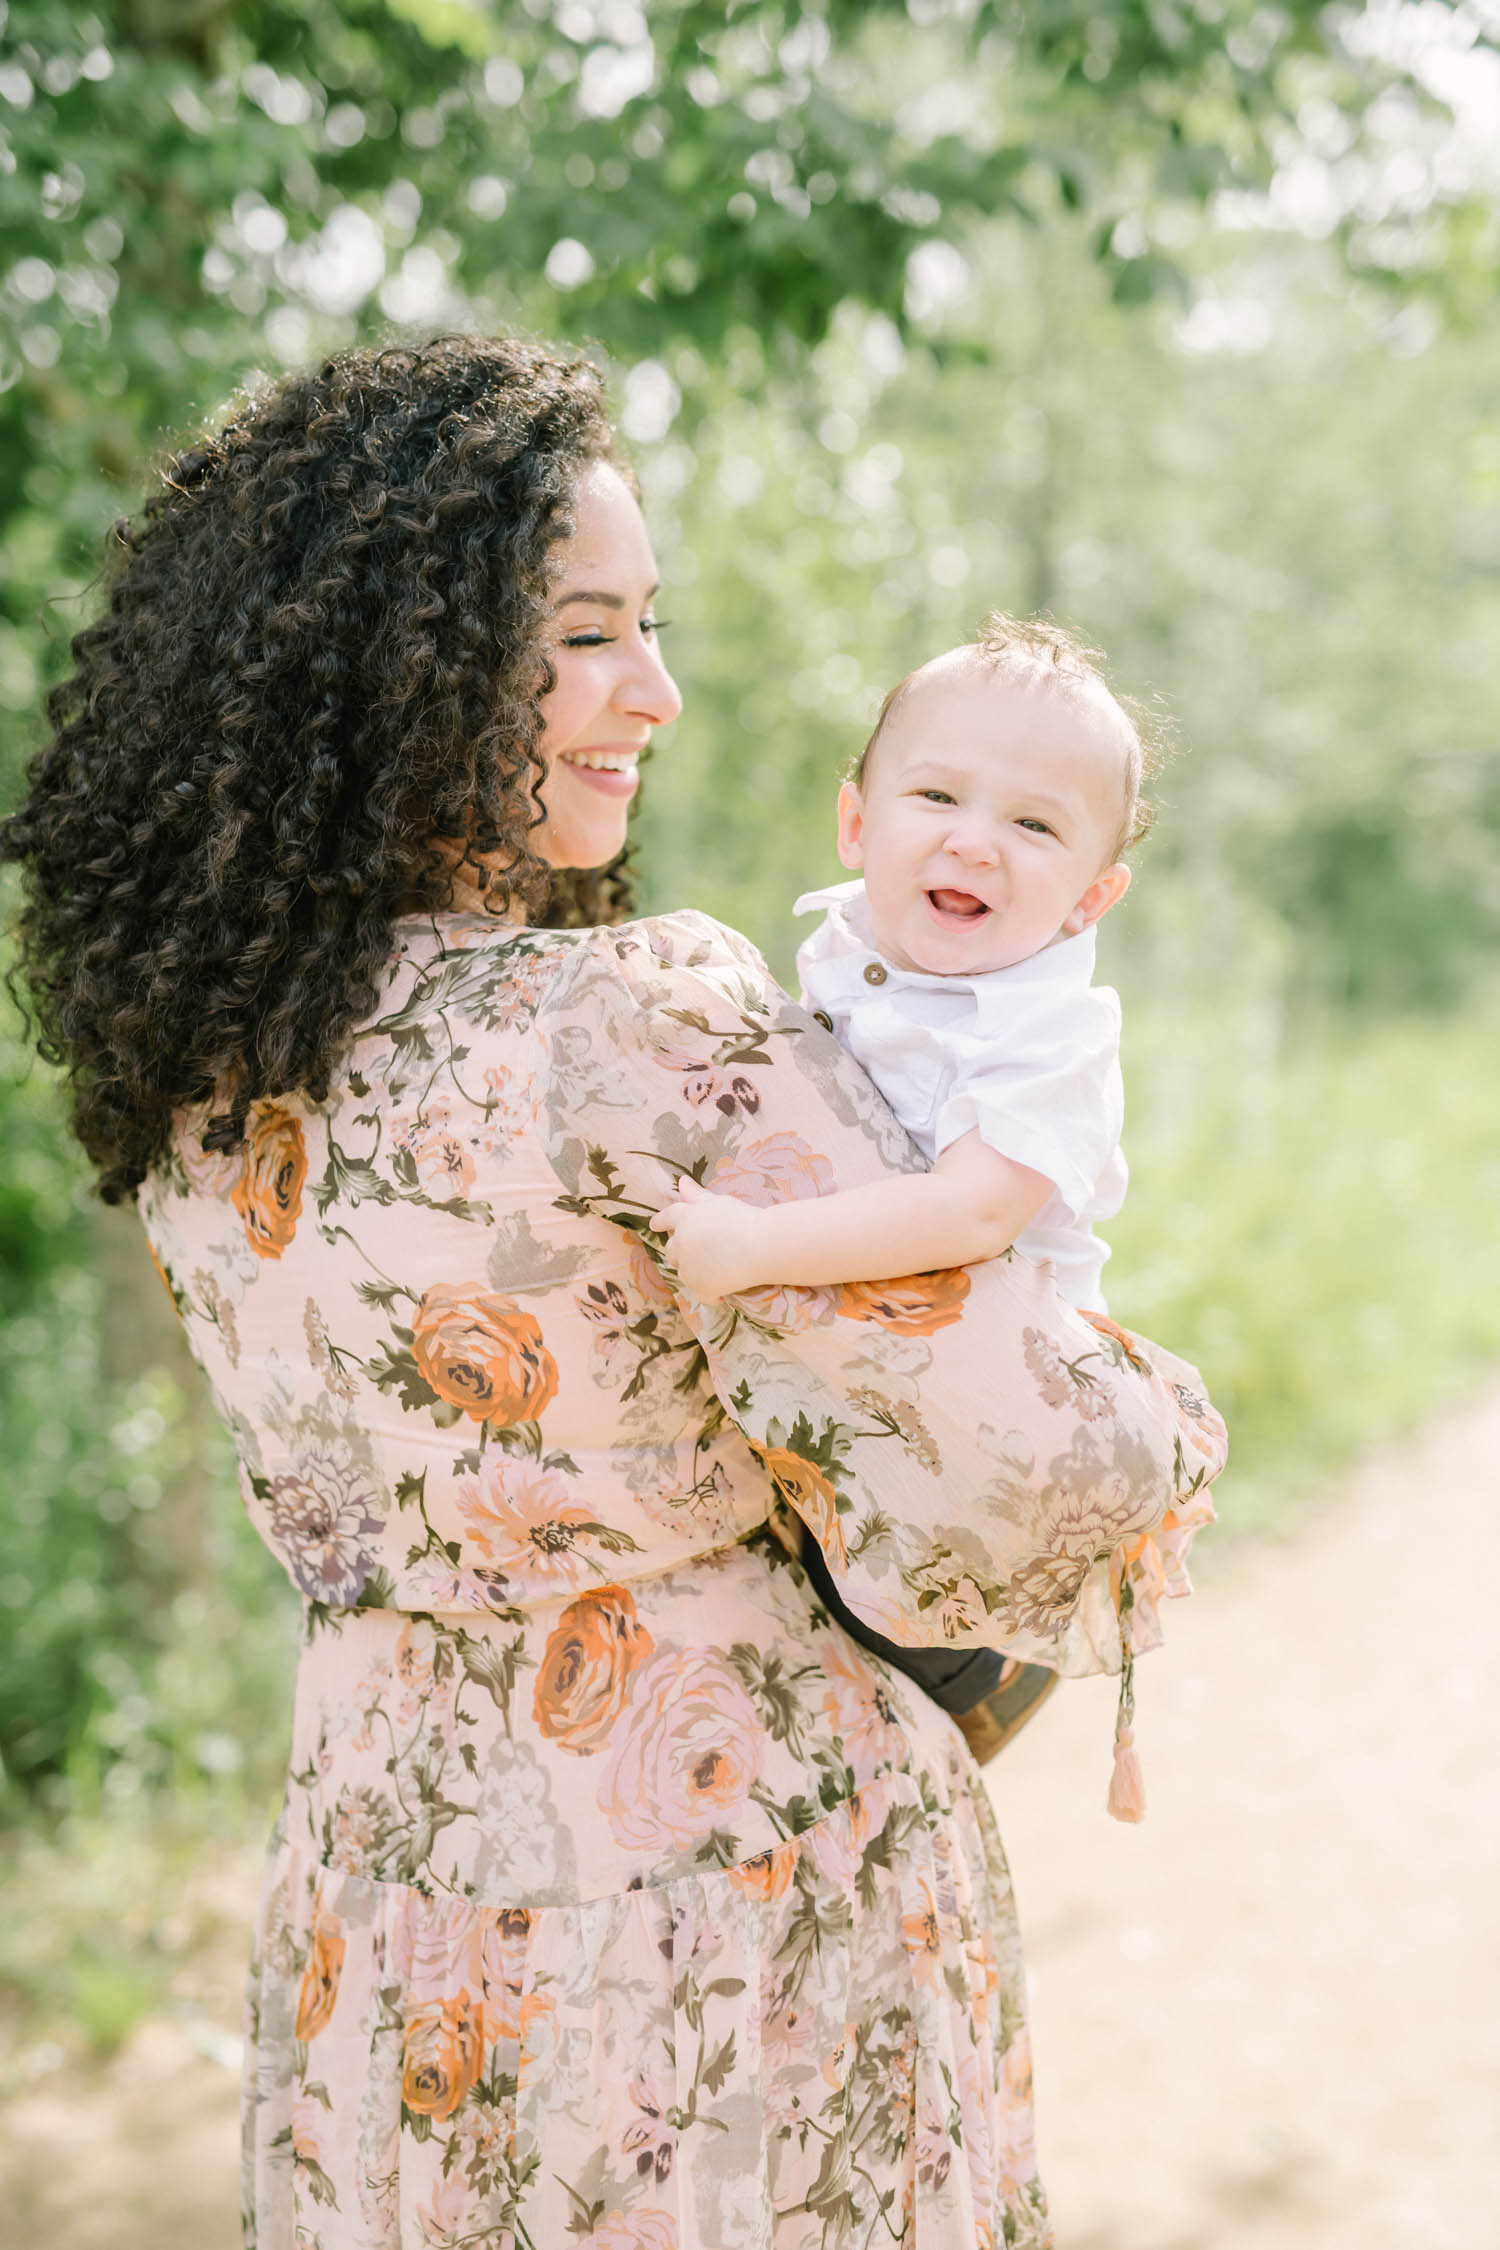 A darling photo of a mother smiling at her baby boy as he smiles over her shoulder at the Houston Arboretum by Christina Elliott Photography. mother and child mother's love happy smiling baby baby under the age of one in family pictures #christinaelliottphotography #christinaelliottfamilies #houstonfamilyphotographer #familyofthree #Houstonarboretum #babyboy #familypictures #outdoorfamilypictures #summerfamilypics #familyphotos #famiyphotographer #Houstonfamilyphotos